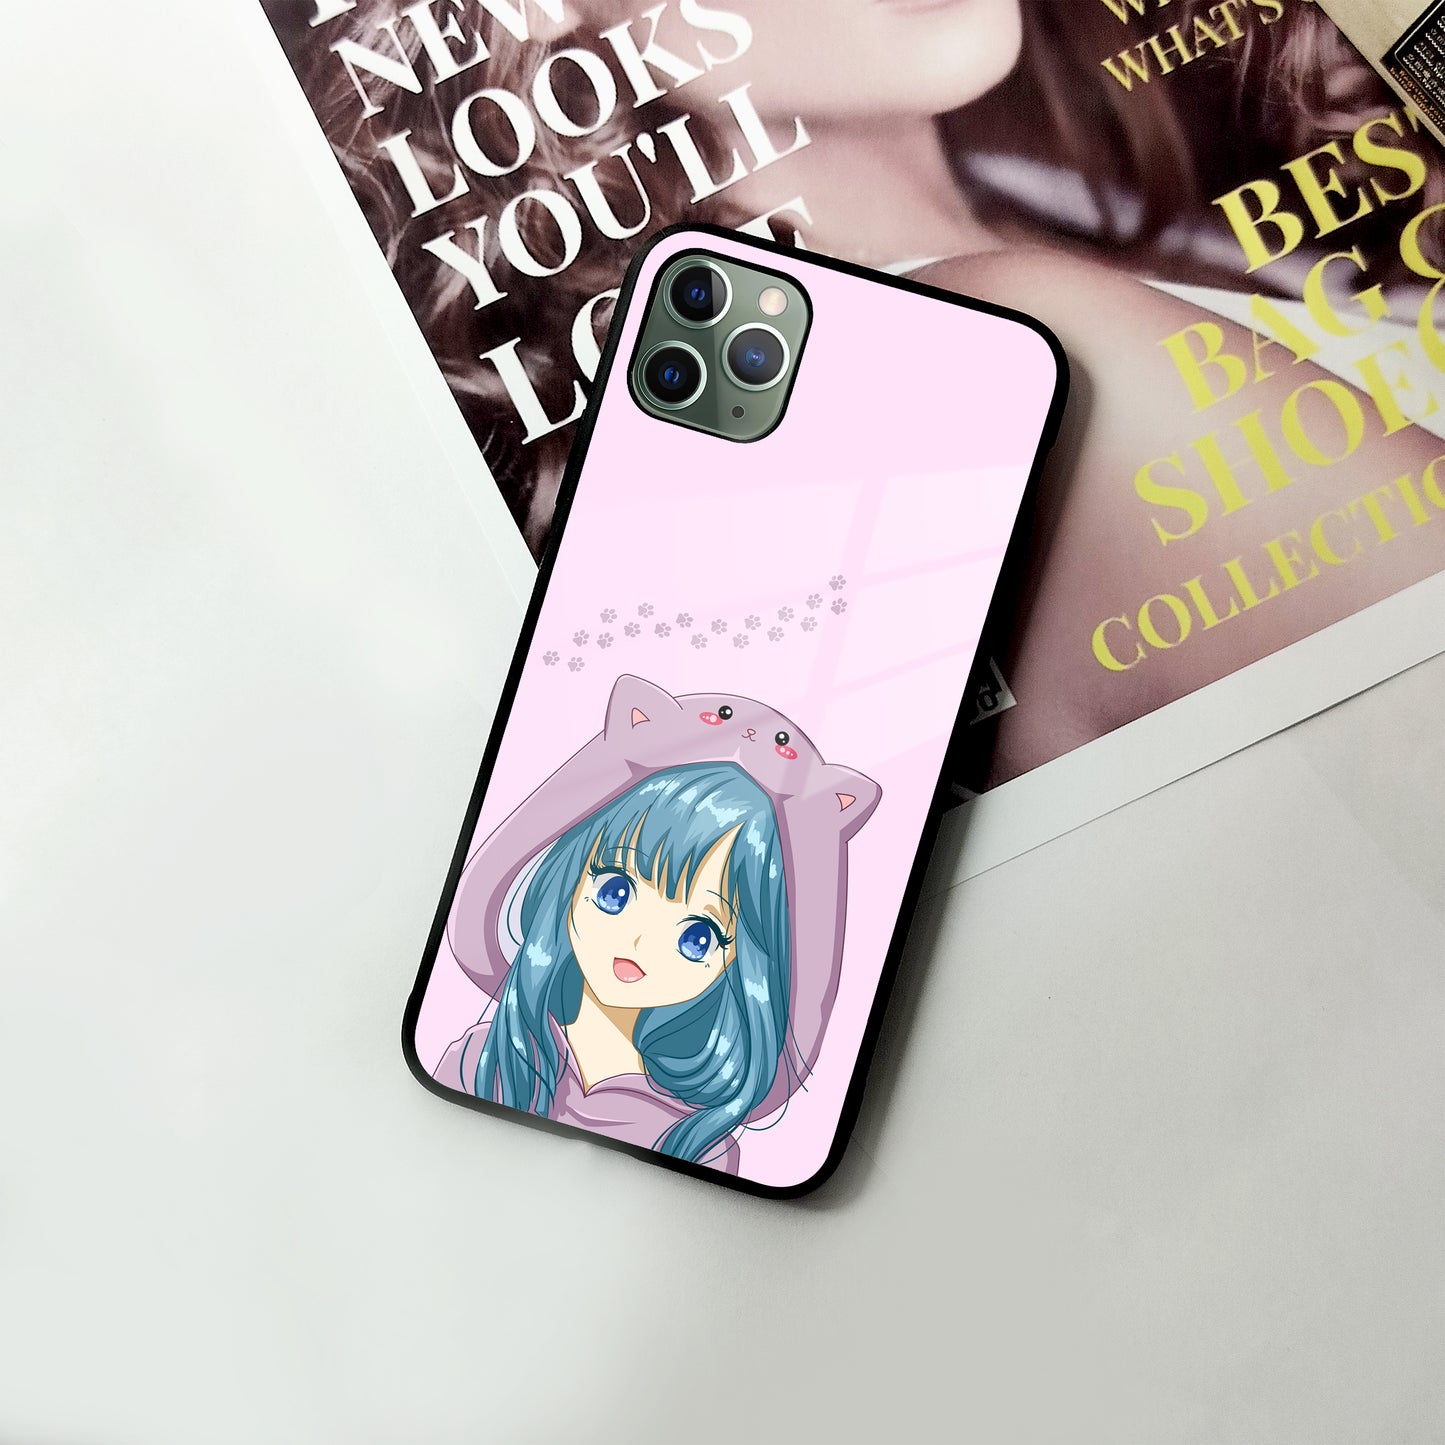 Purple Aesthetic Girl With Cat Phone Glass Case Cover For iPhone